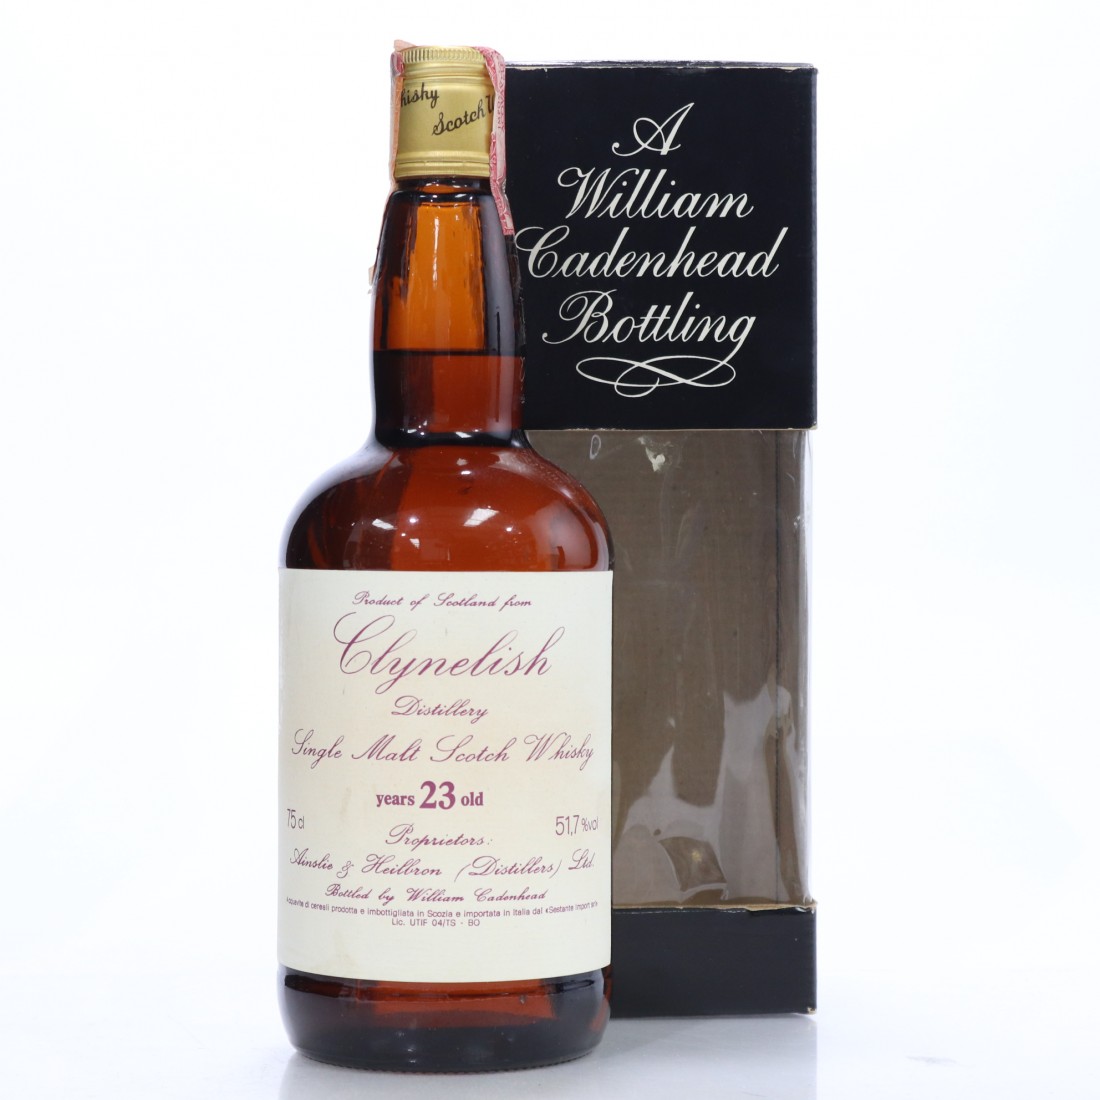 Image via Whisky Auctioneer